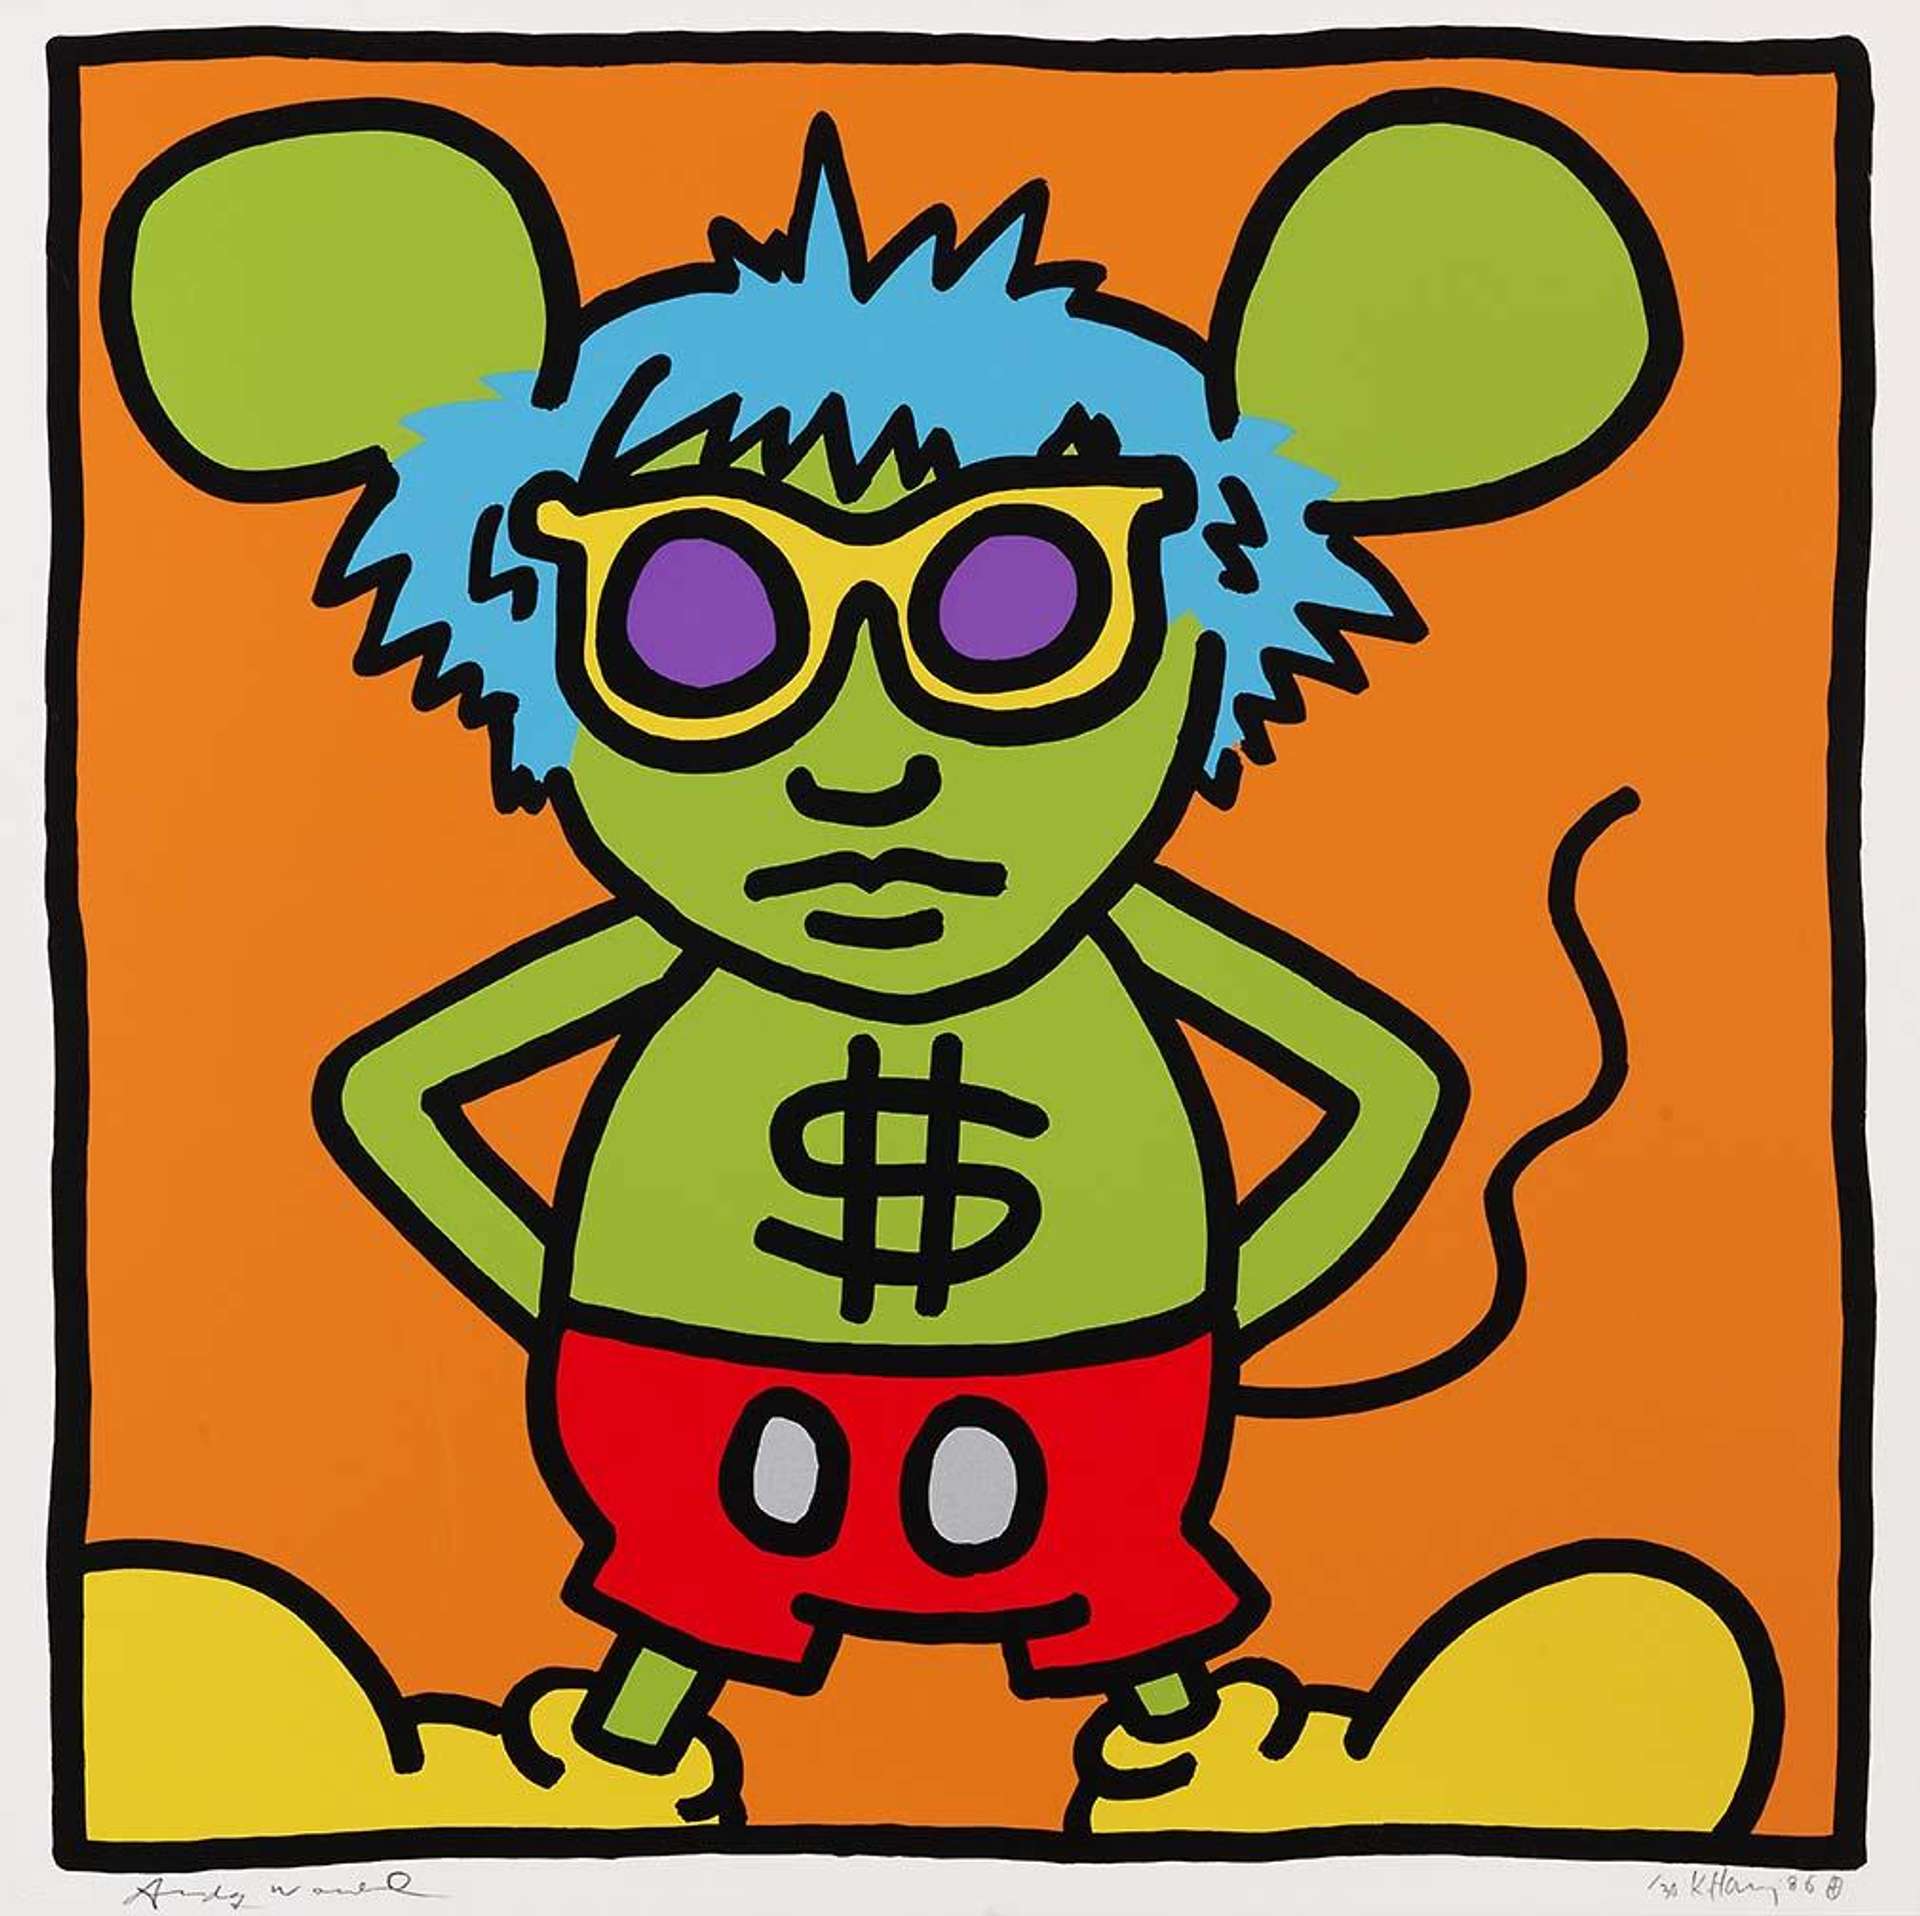 A screenprint by Keith Haring depicting artist Andy Warhol as the cartoon character Mickey Mouse, with a dollar sign on his chest, set against a bright a bright orange background.